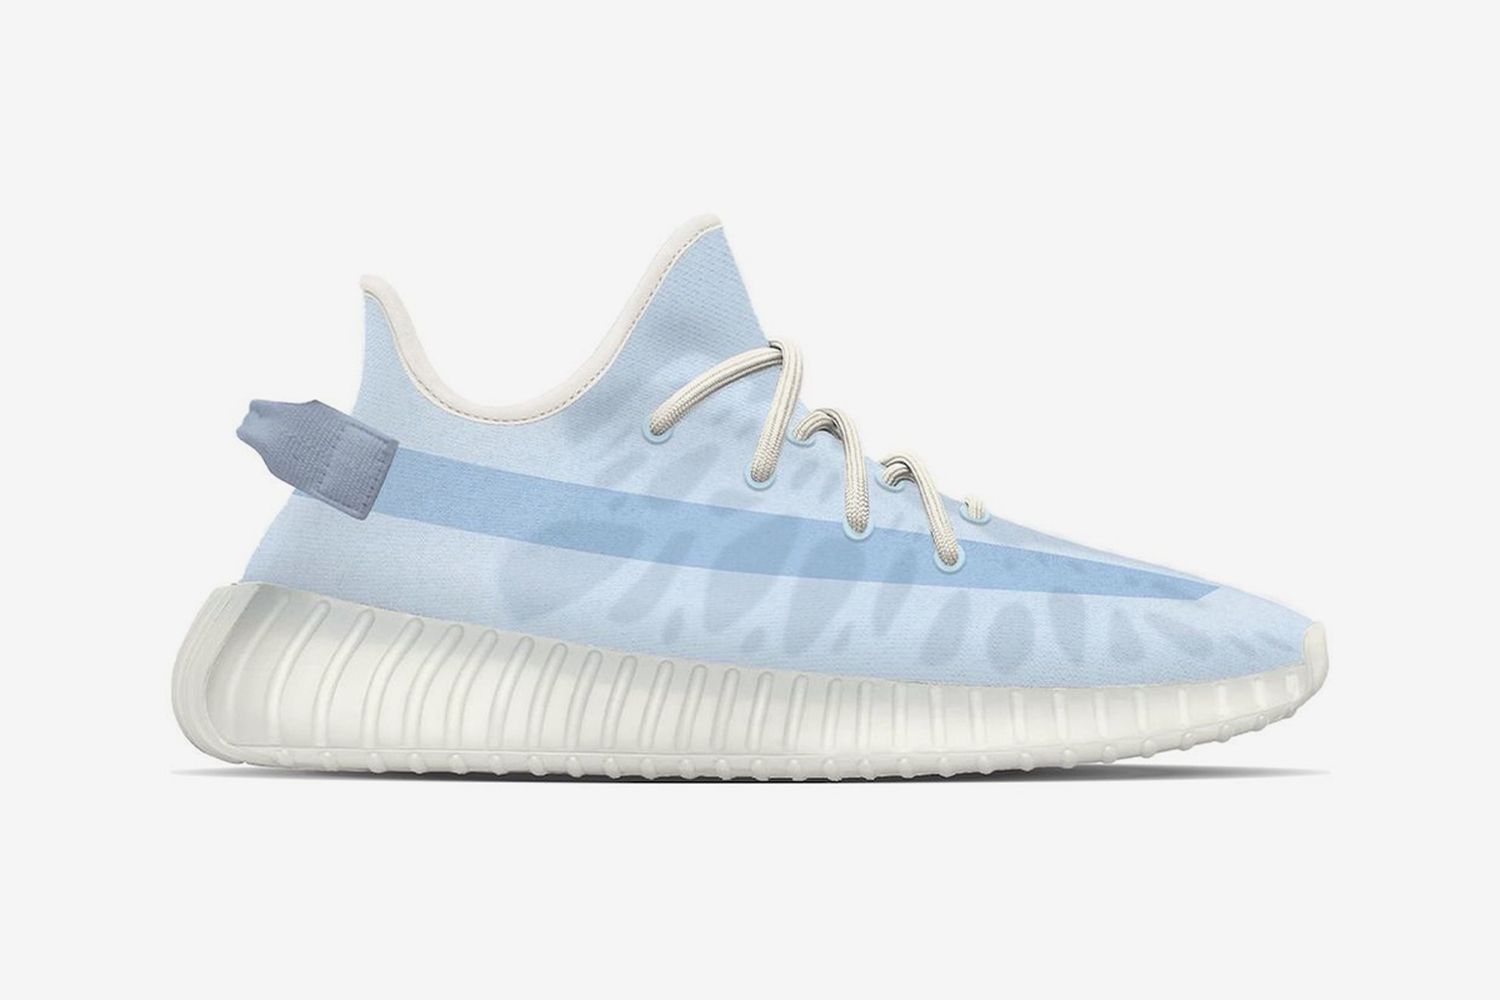 Reductor Saltar congelado adidas YEEZY Boost 350 V2 Mono Pack: Where to Buy & Resale Prices